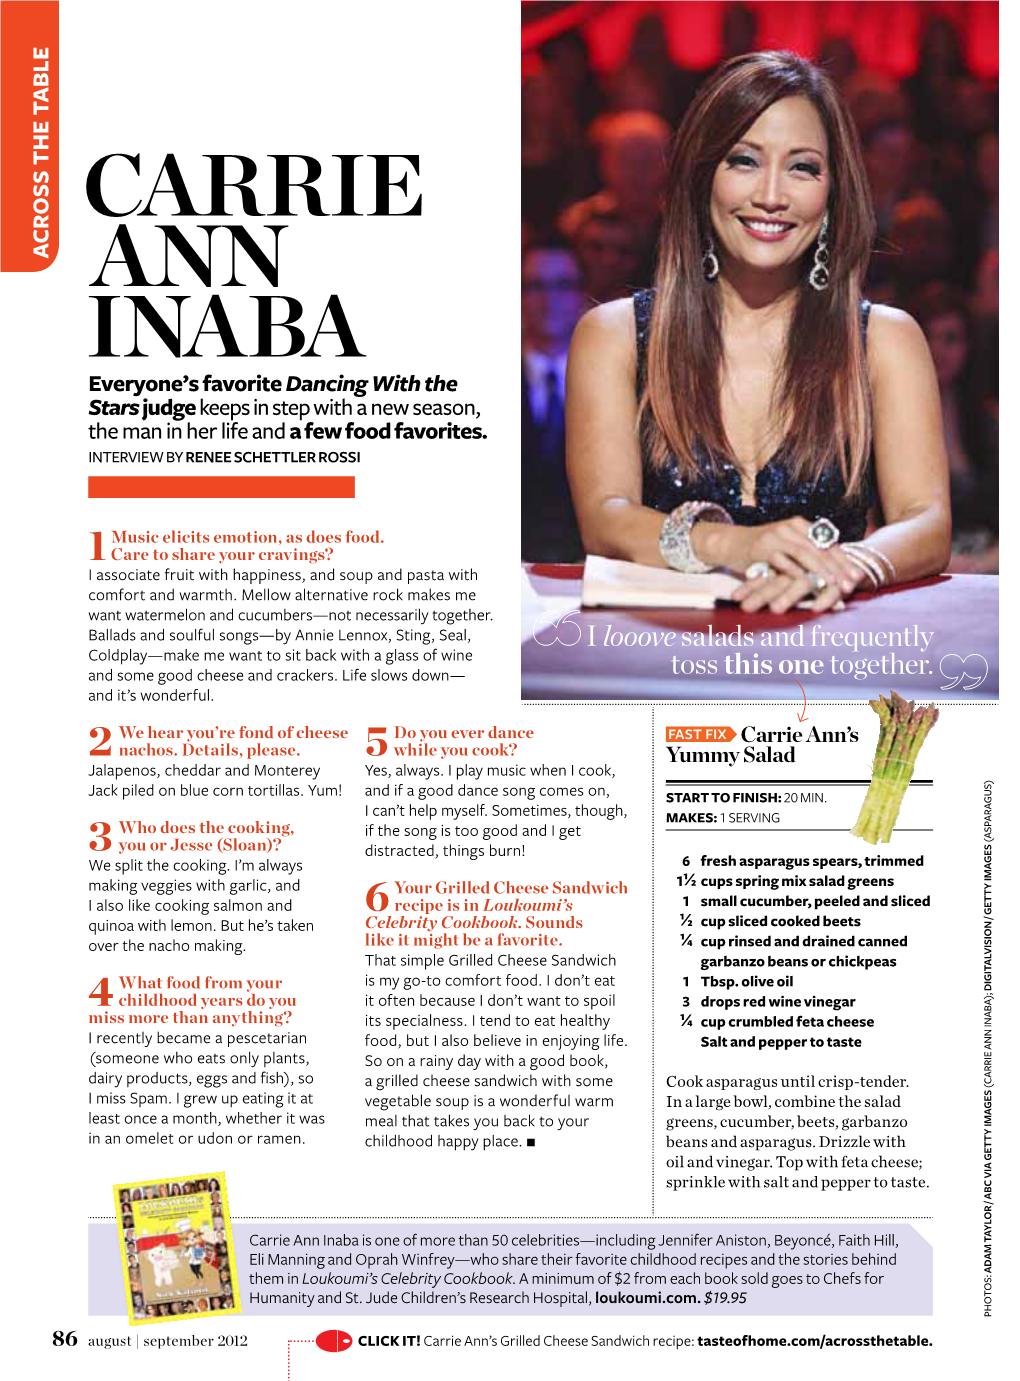 Carrie Ann Inaba); D (Carrie Ann Inaba); a Grilled Cheese Sandwich with Some Cook Asparagus Until Crisp-Tender